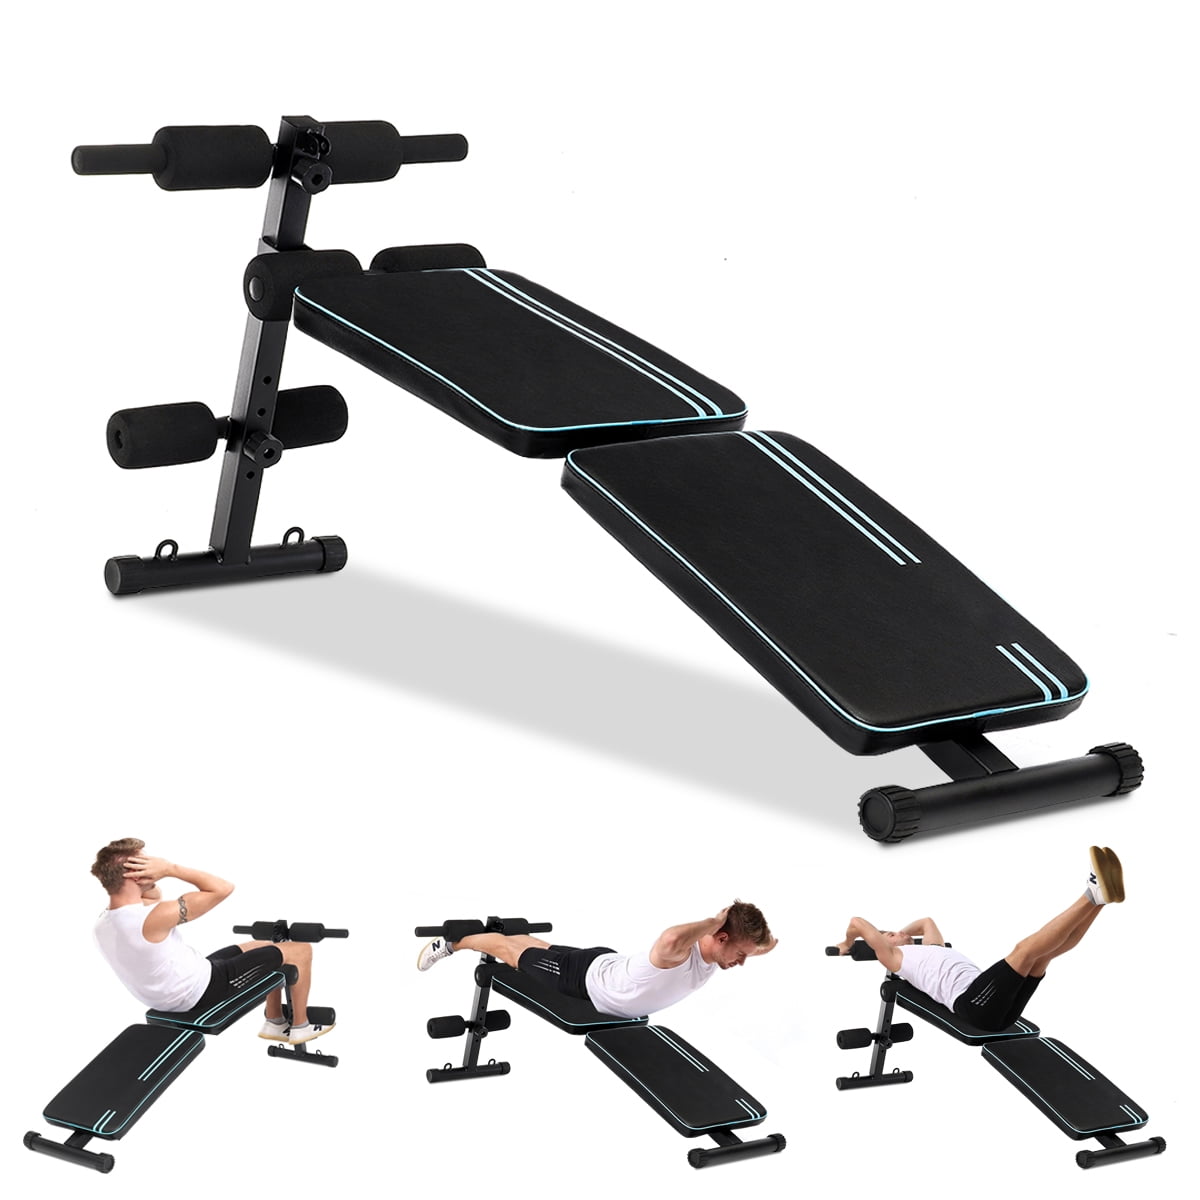 DUTTY sit up Assistant Device Abdominal Exercise Equipment Leg Press Machines for Bodybuilder Home Gym arm Waist Exercise Fitness Stretching Training 